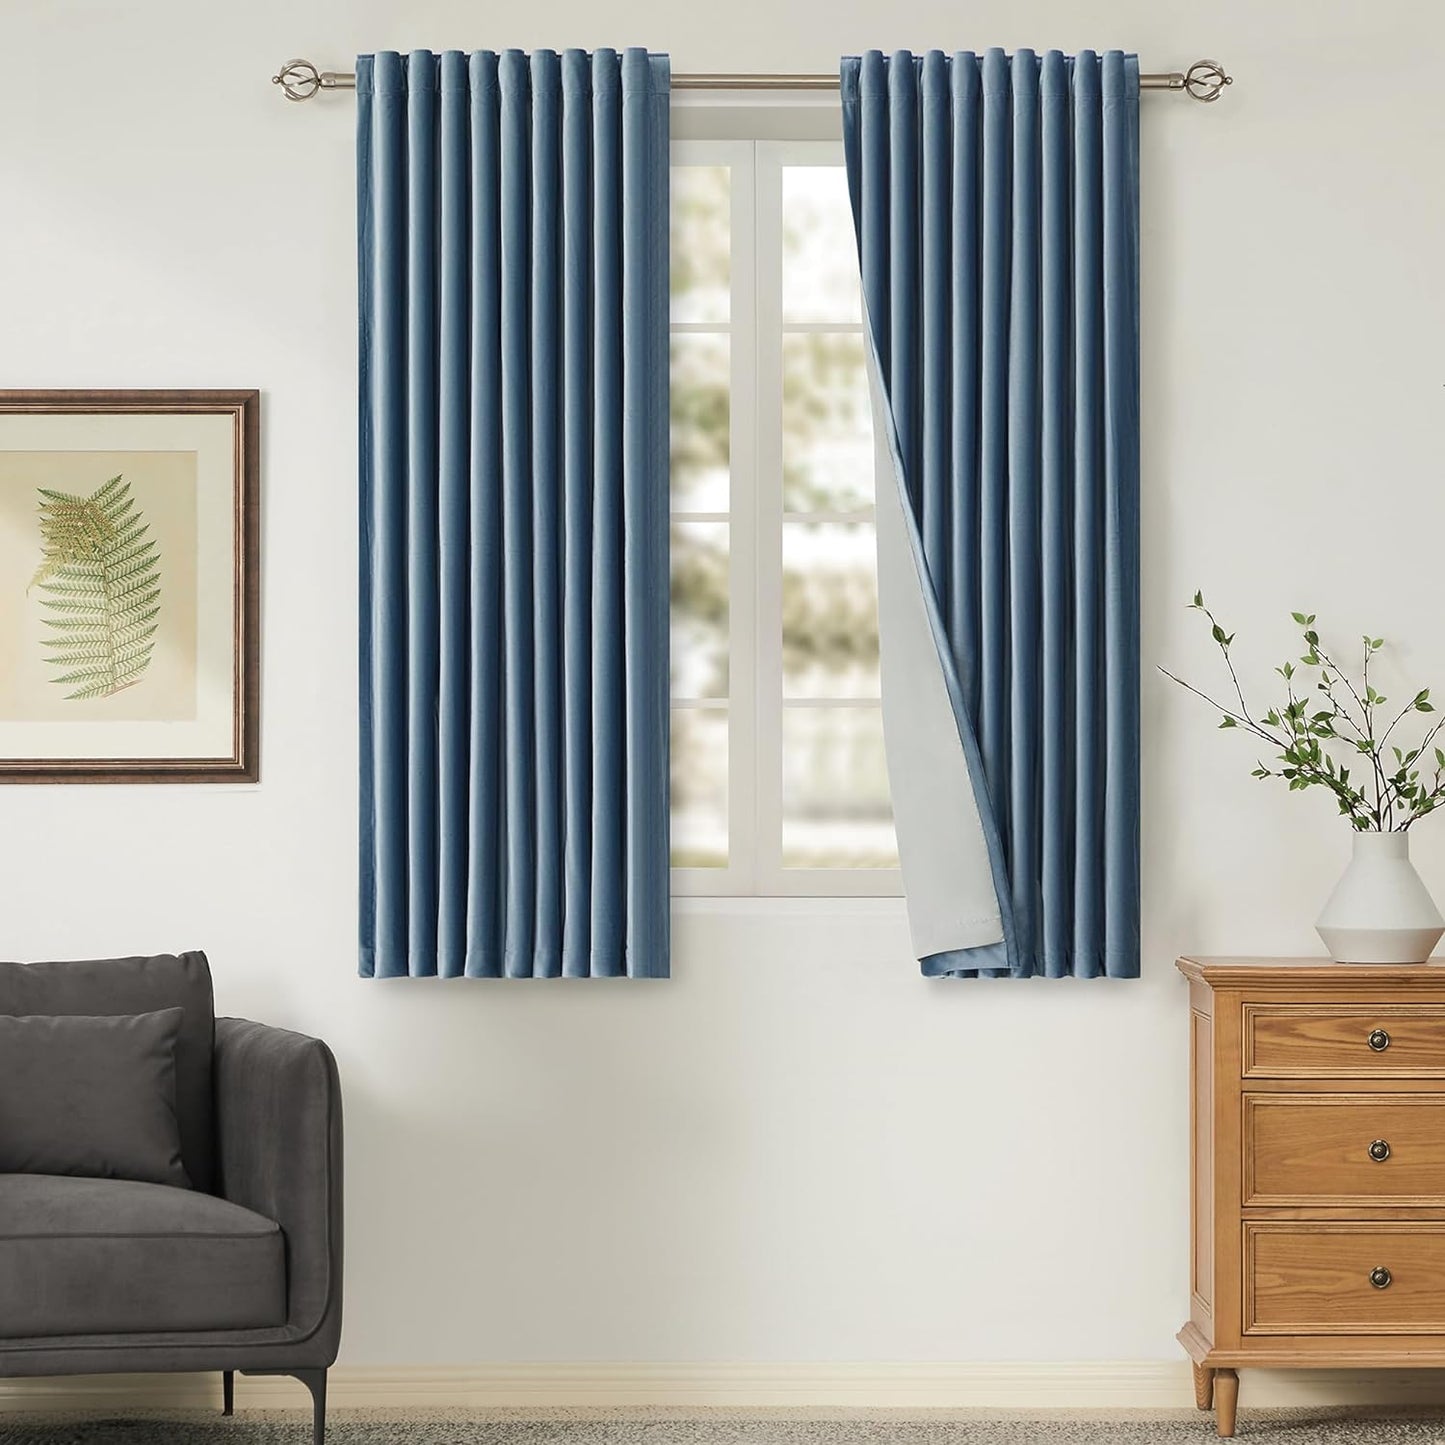 100% Blackout Ivory off White Velvet Curtains 108 Inch Long for Living Room,Set of 2 Panels Liner Rod Pocket Back Tab Thermal Window Drapes Room Darkening Heavy Decorative Curtains for Bedroom  PRIMROSE Stone Blue 52X63 Inches 